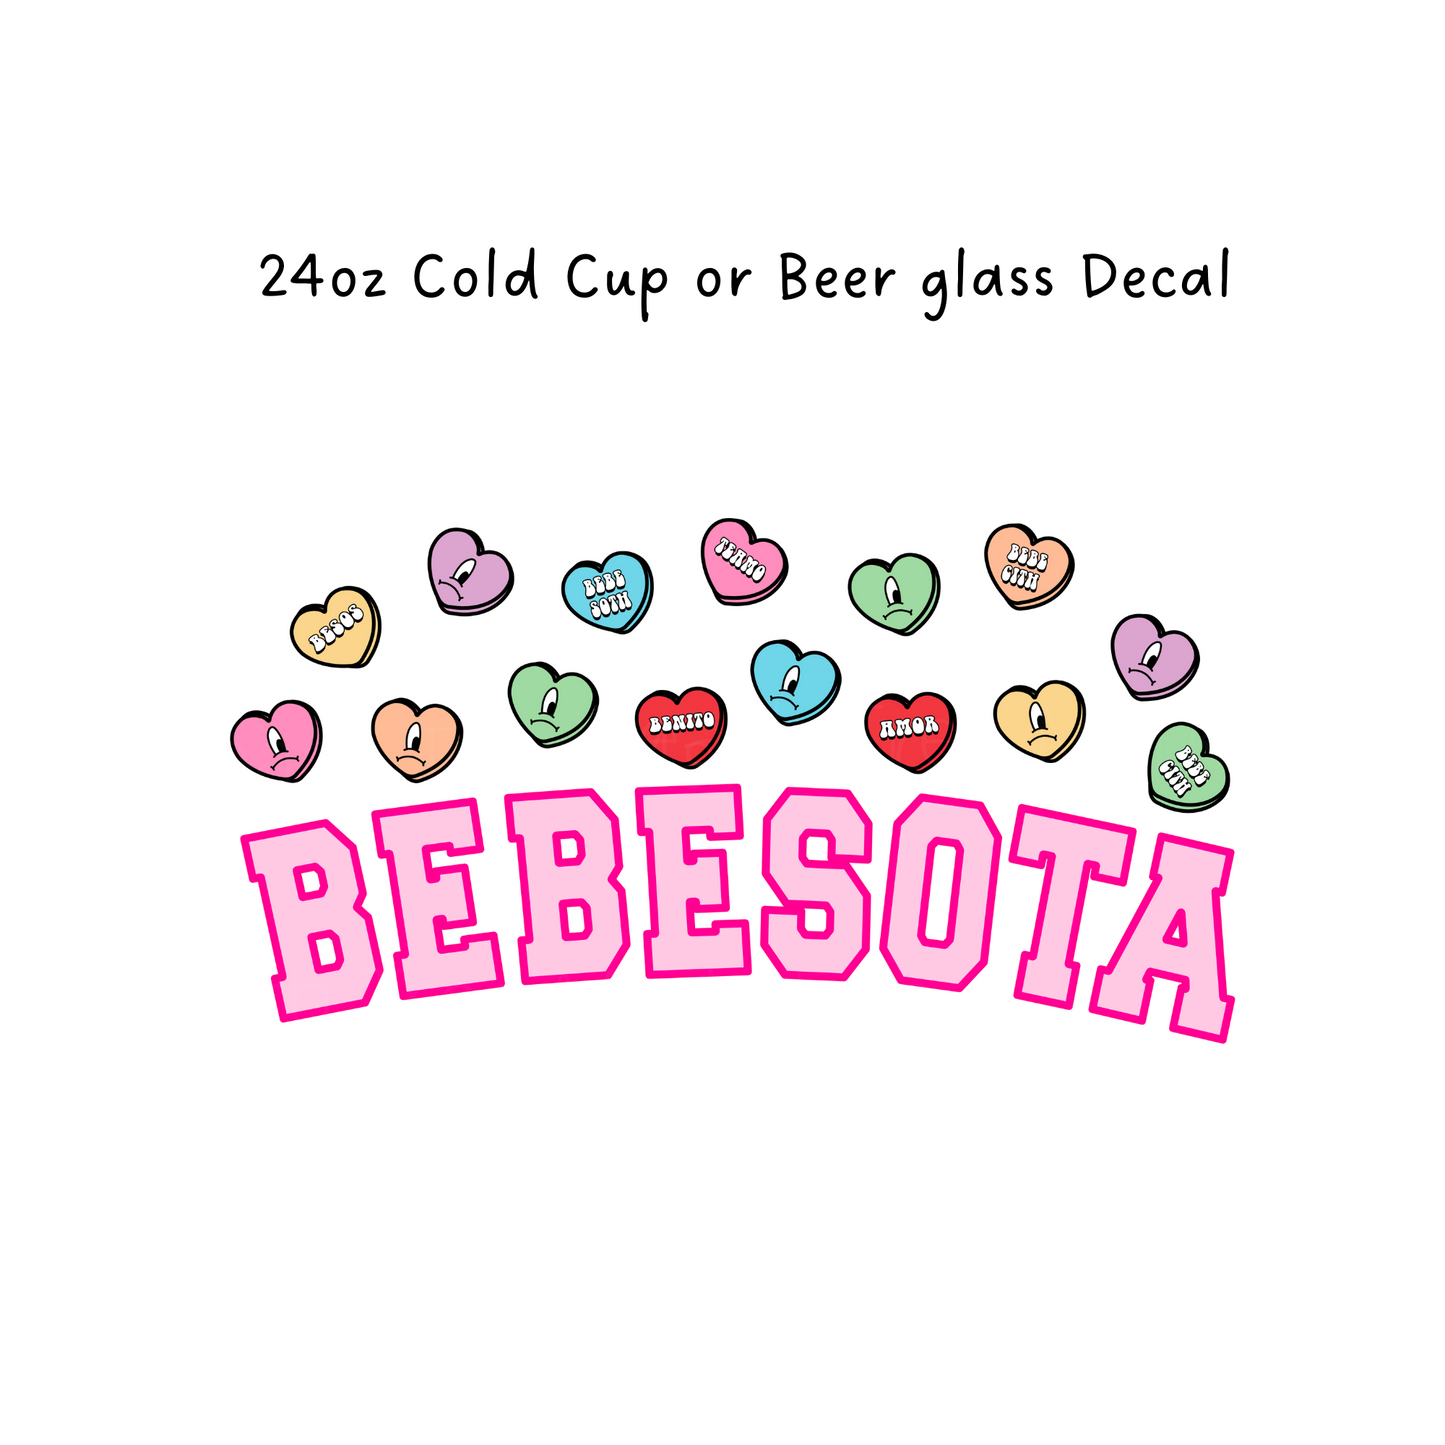 Bebesota  Cold Cup or Beer Glass Decal